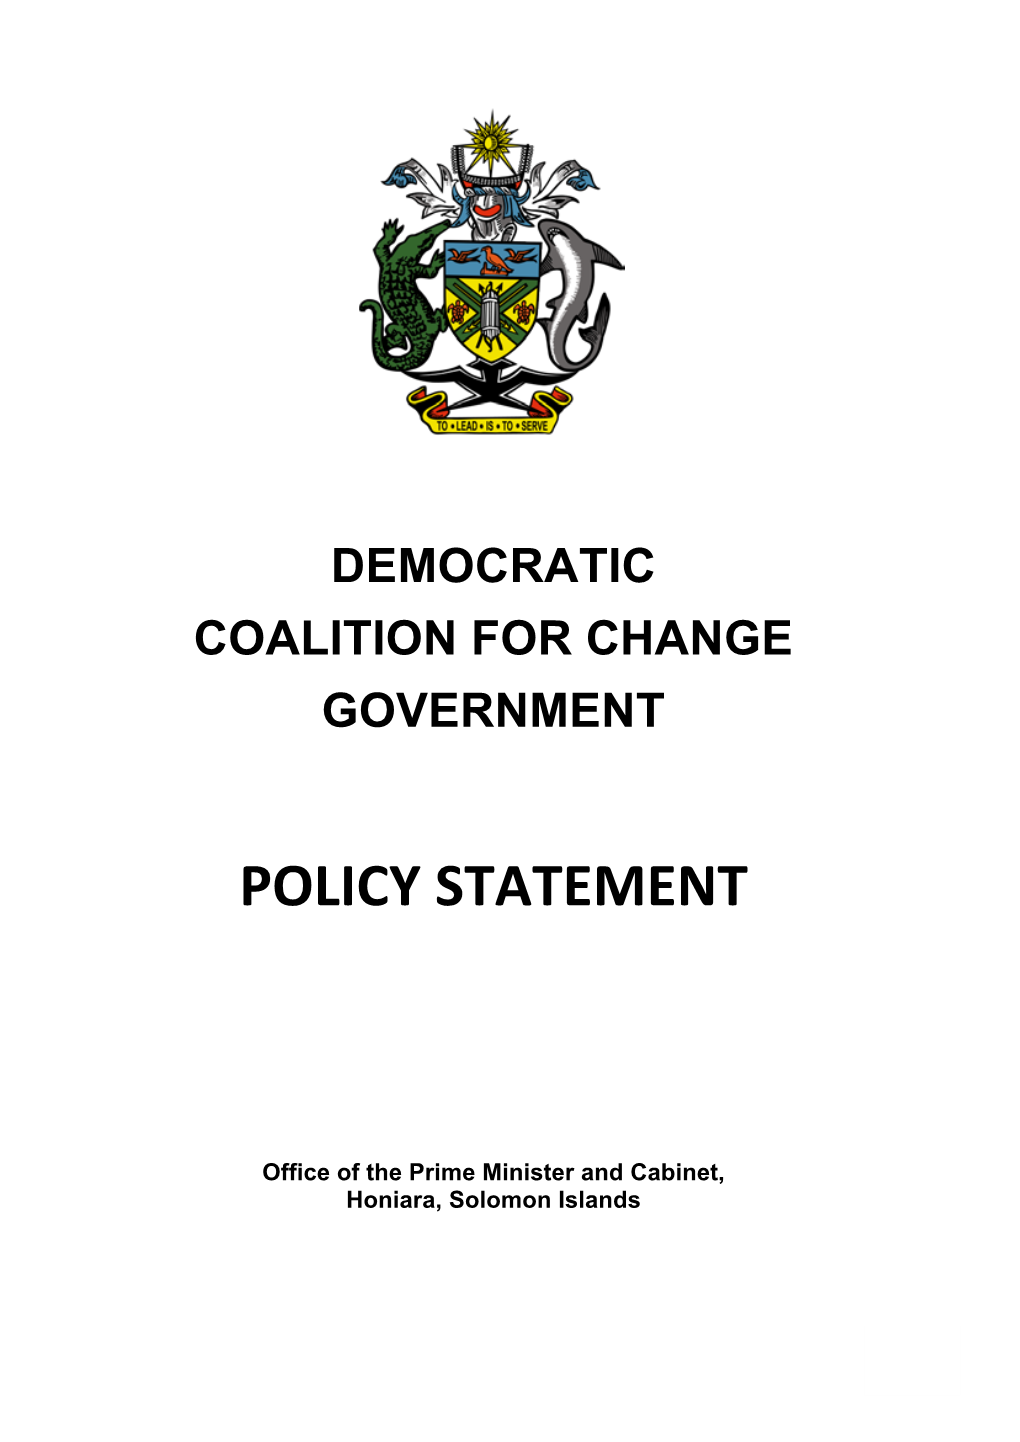 Democratic Coalition for Change Government